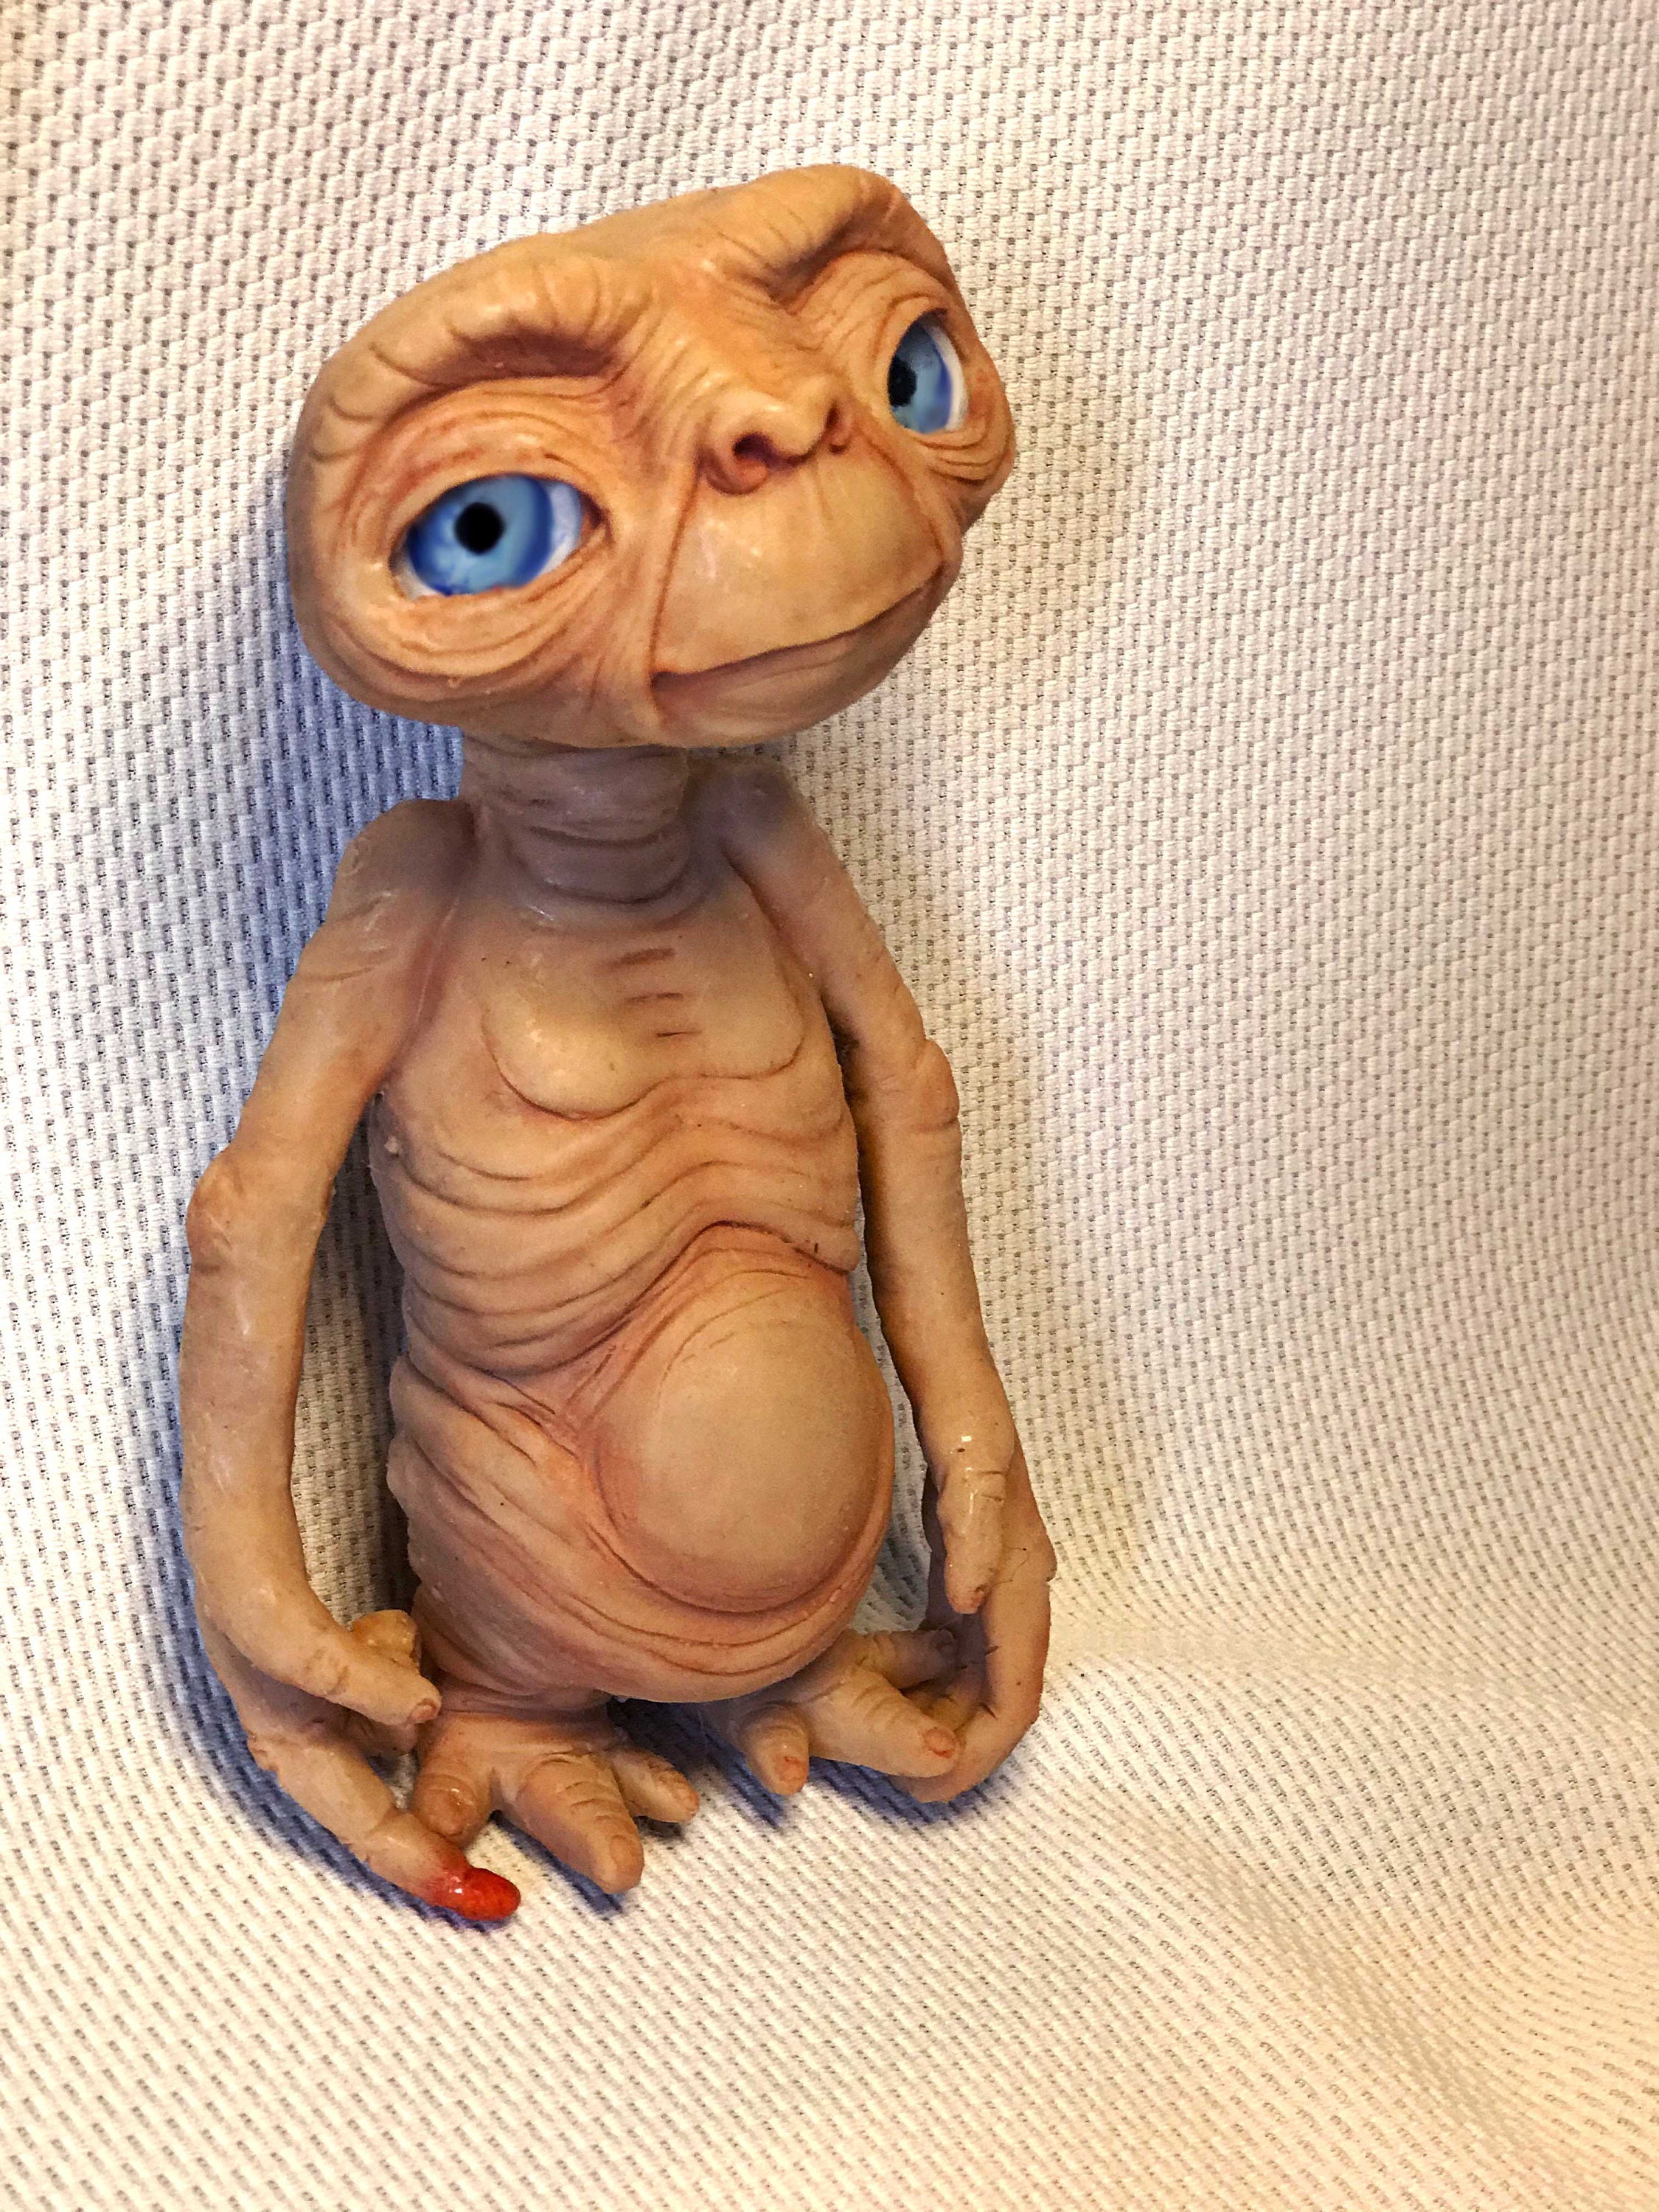 Tiny Baby E.T. the Extraterrestrial Silicone Doll 5,9 In. /15 Cm MADE TO  ORDER 